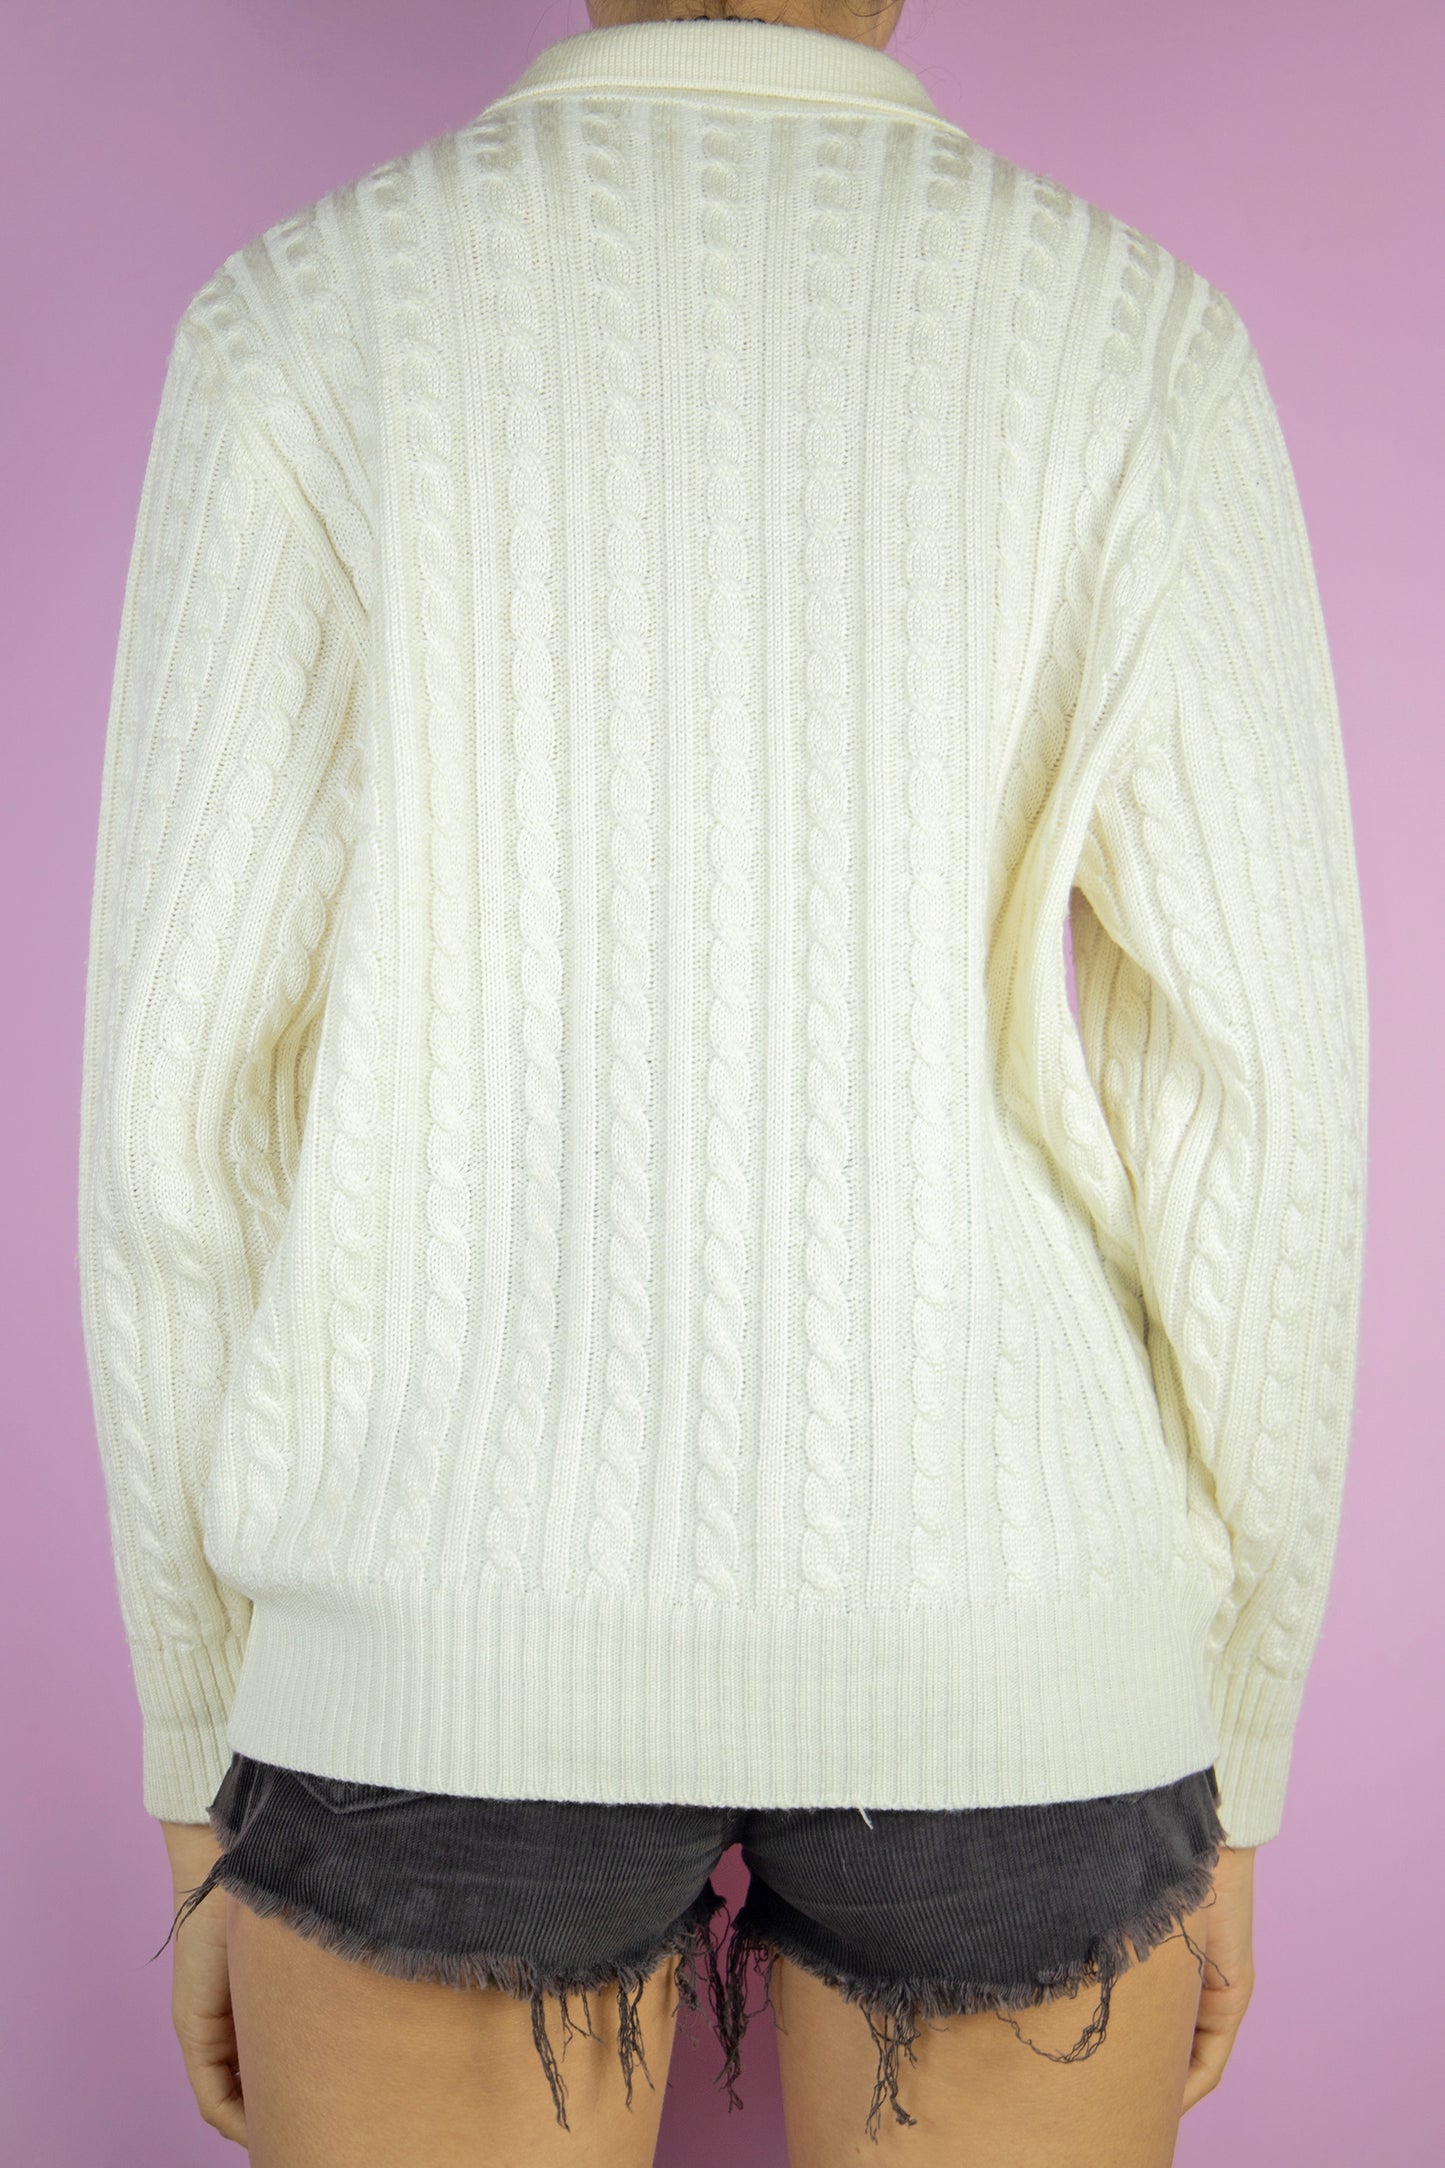 Vintage 90's White Cable Knit Sweater - S/M